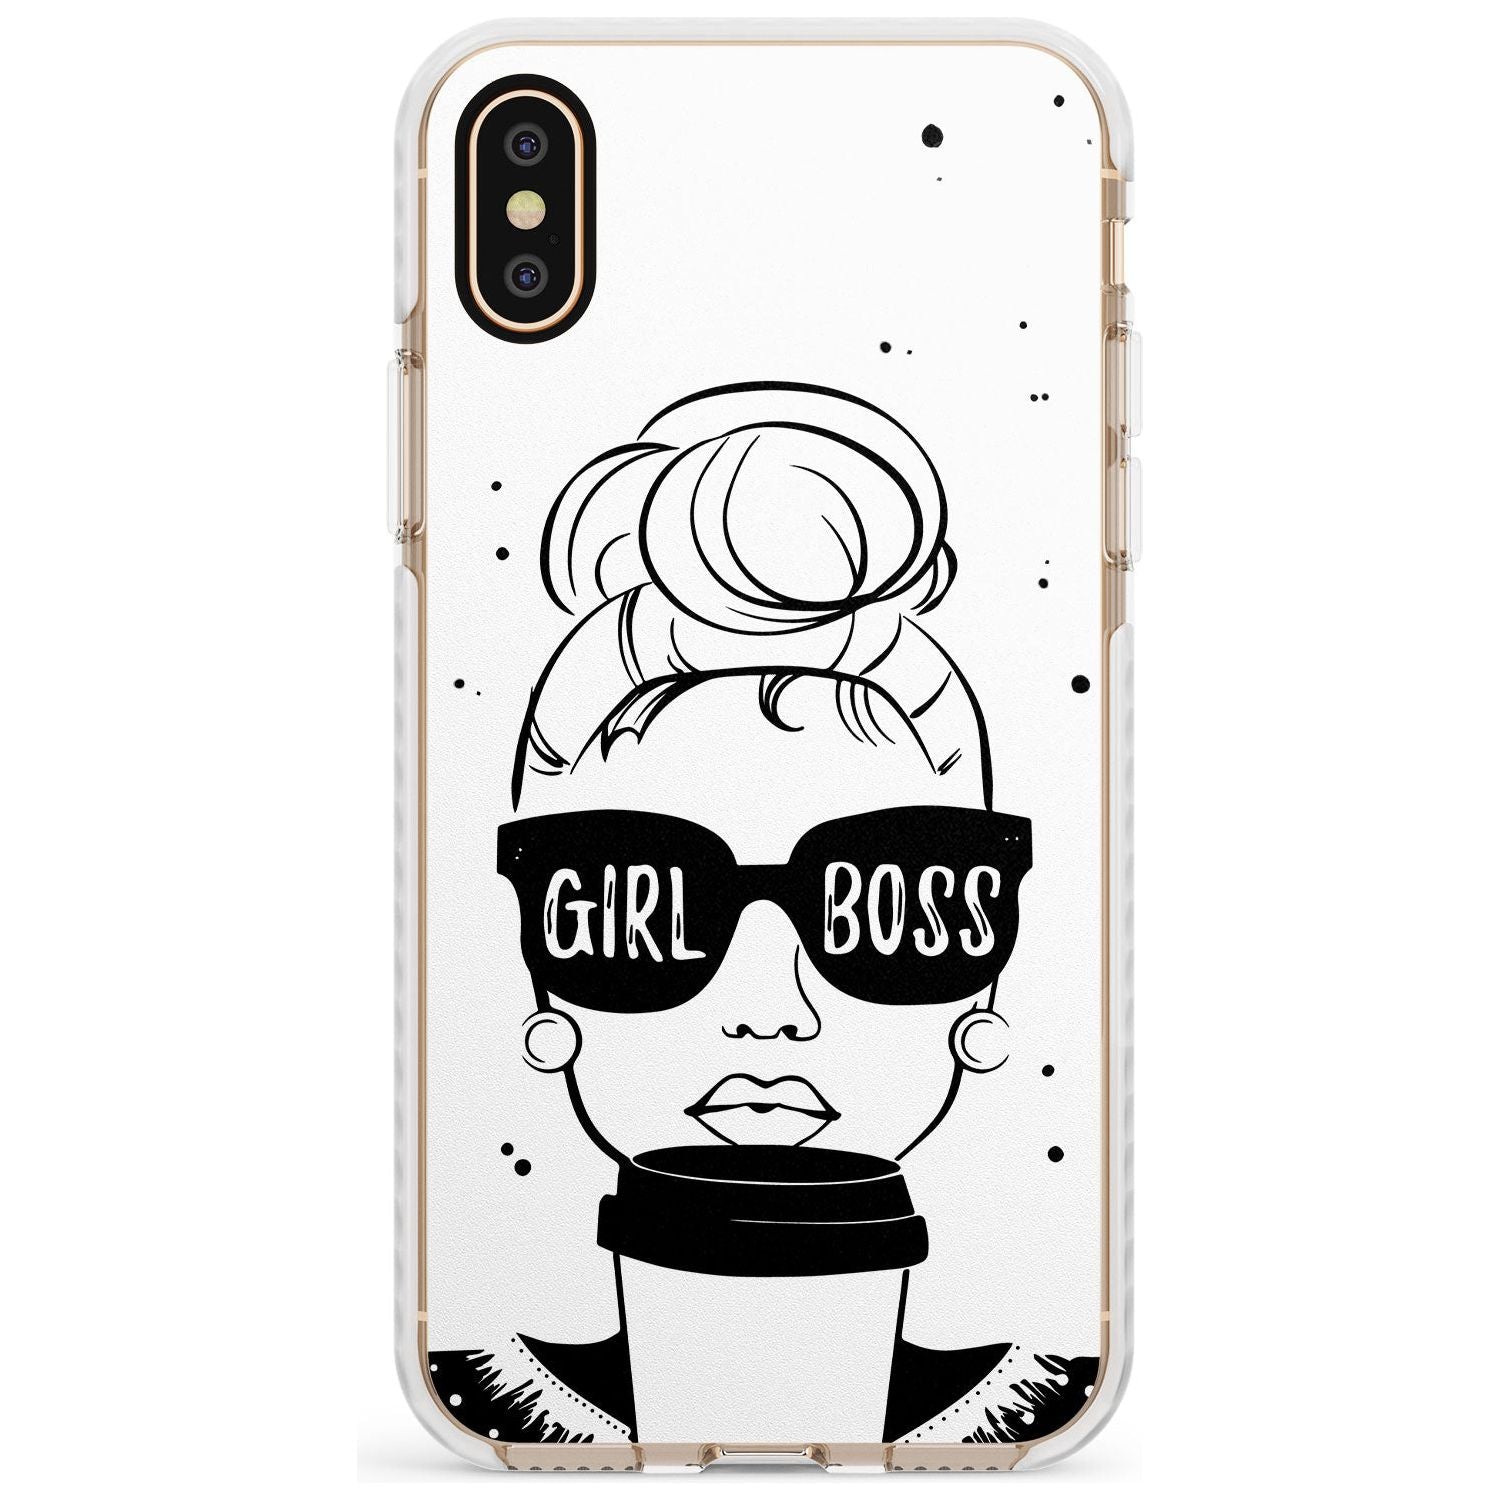 Girl Boss Impact Phone Case for iPhone X XS Max XR